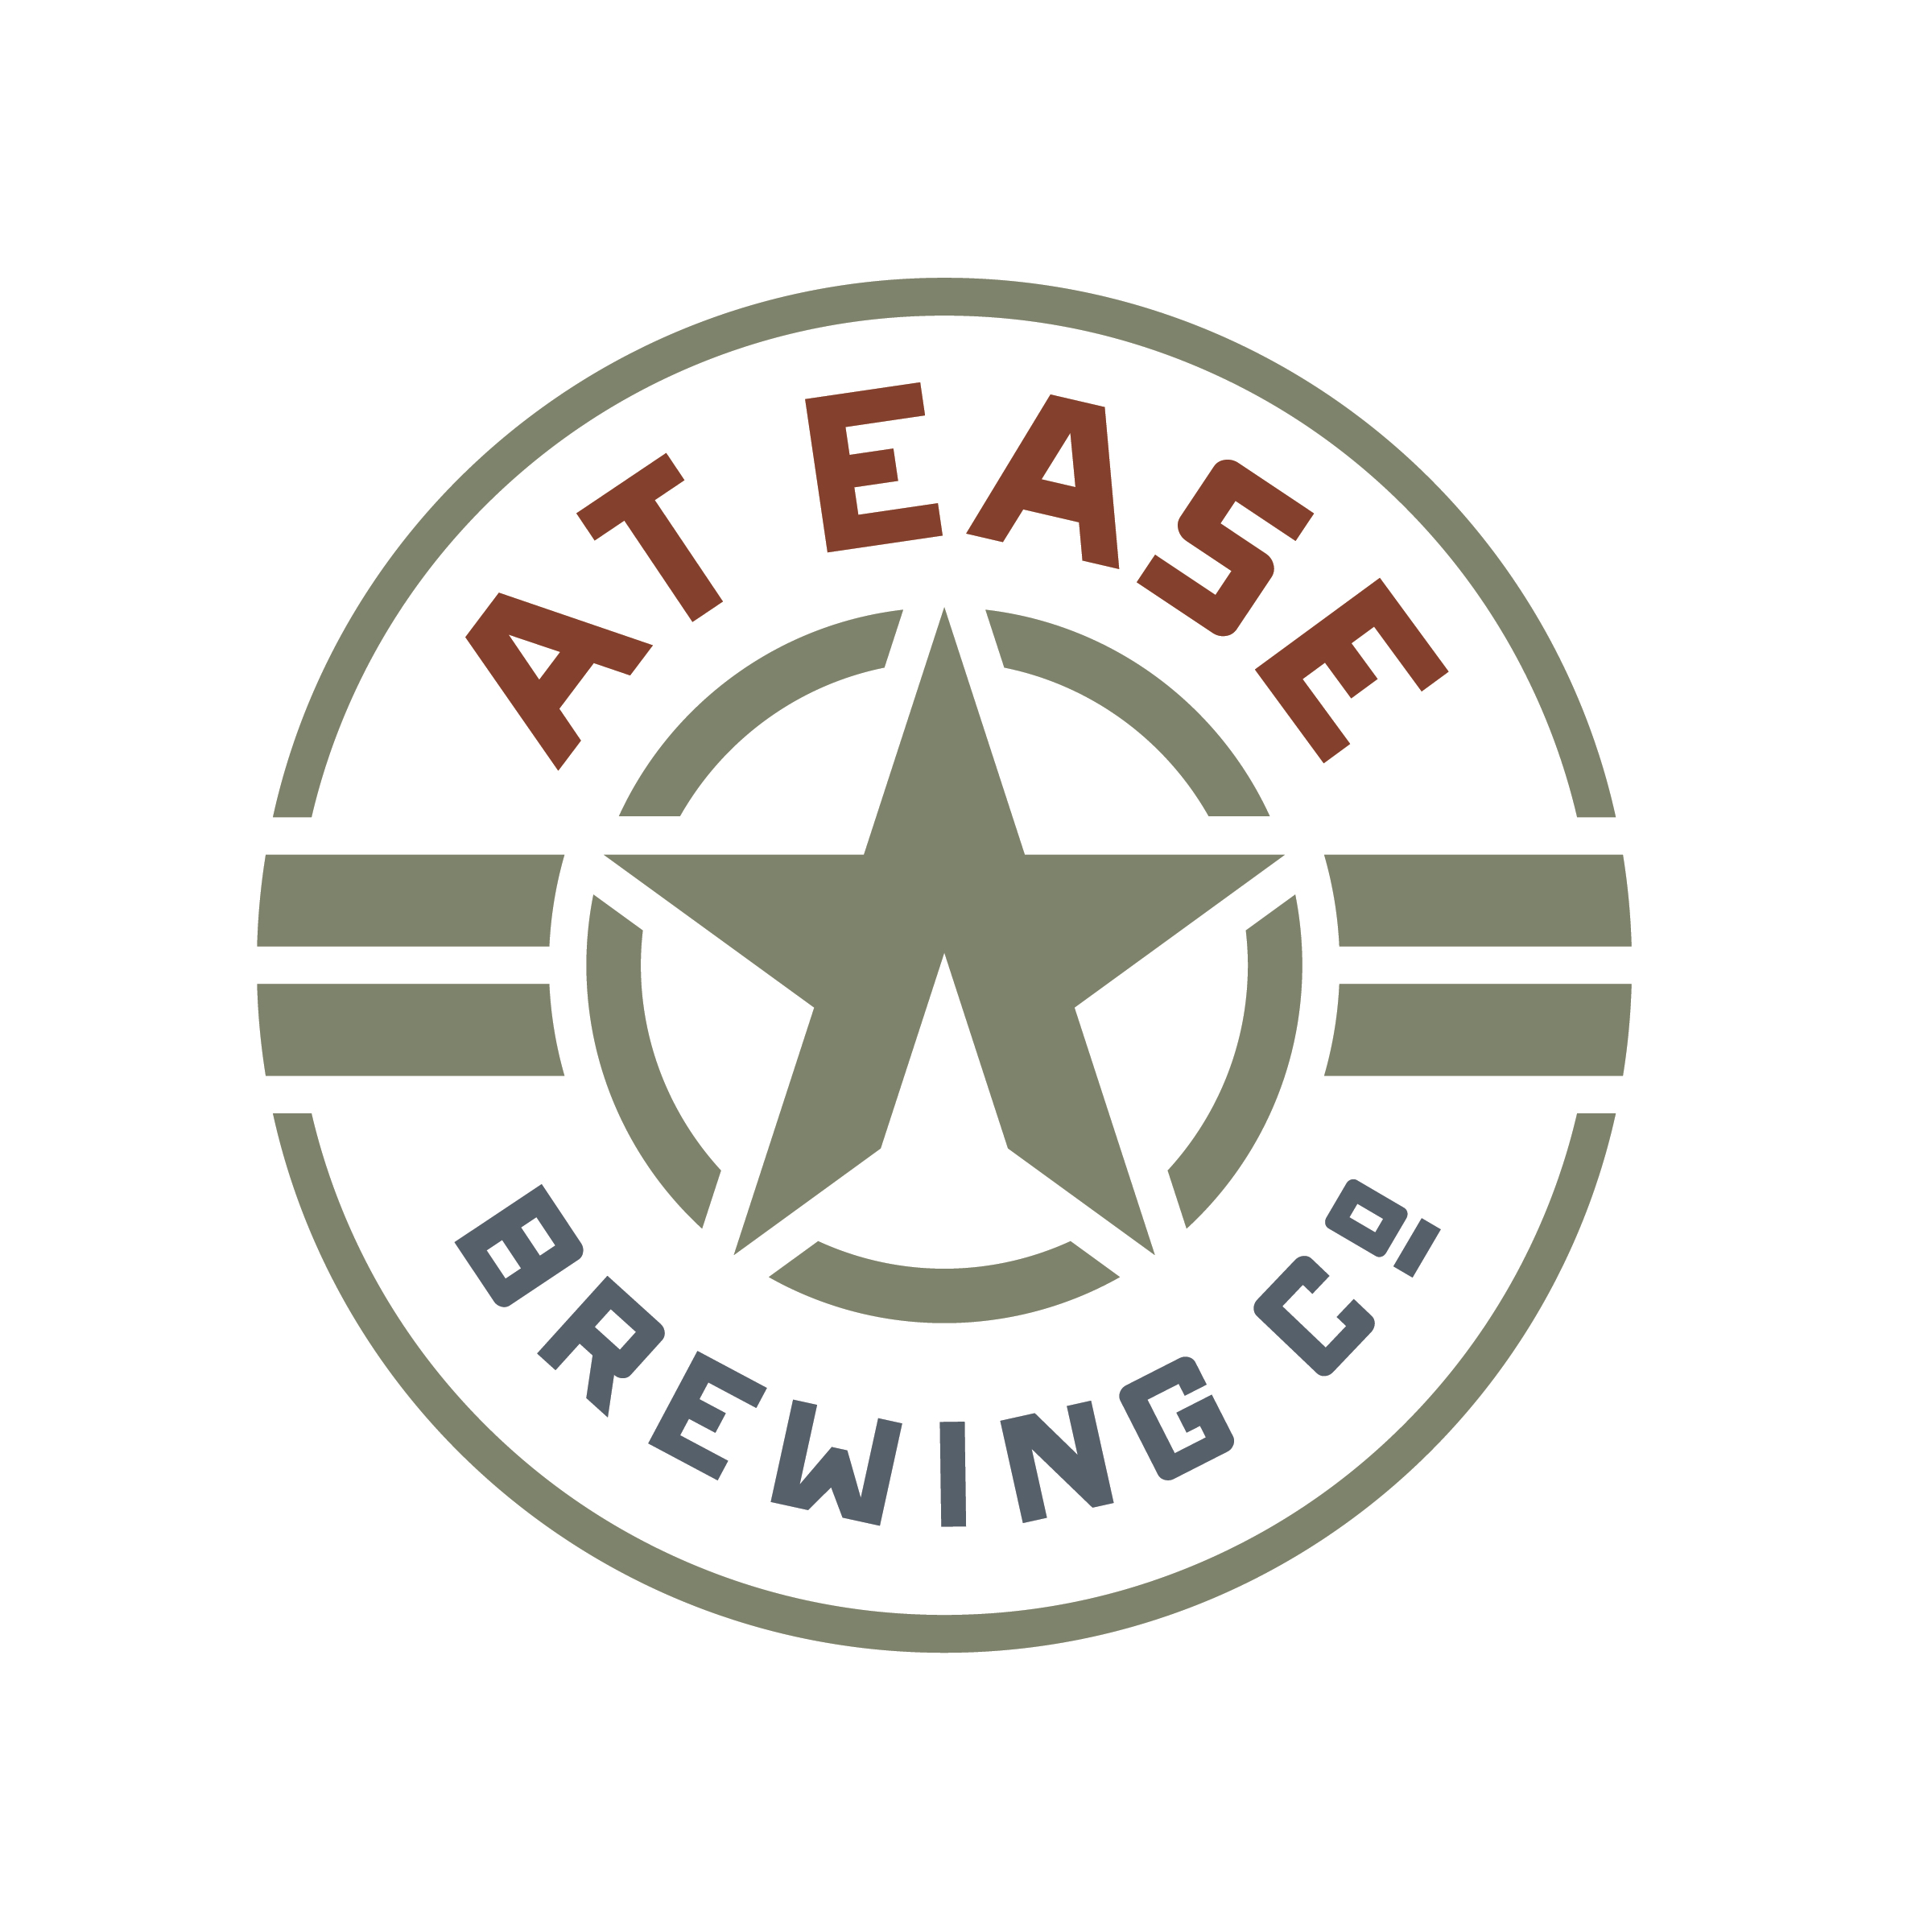 At Ease Brewing Company